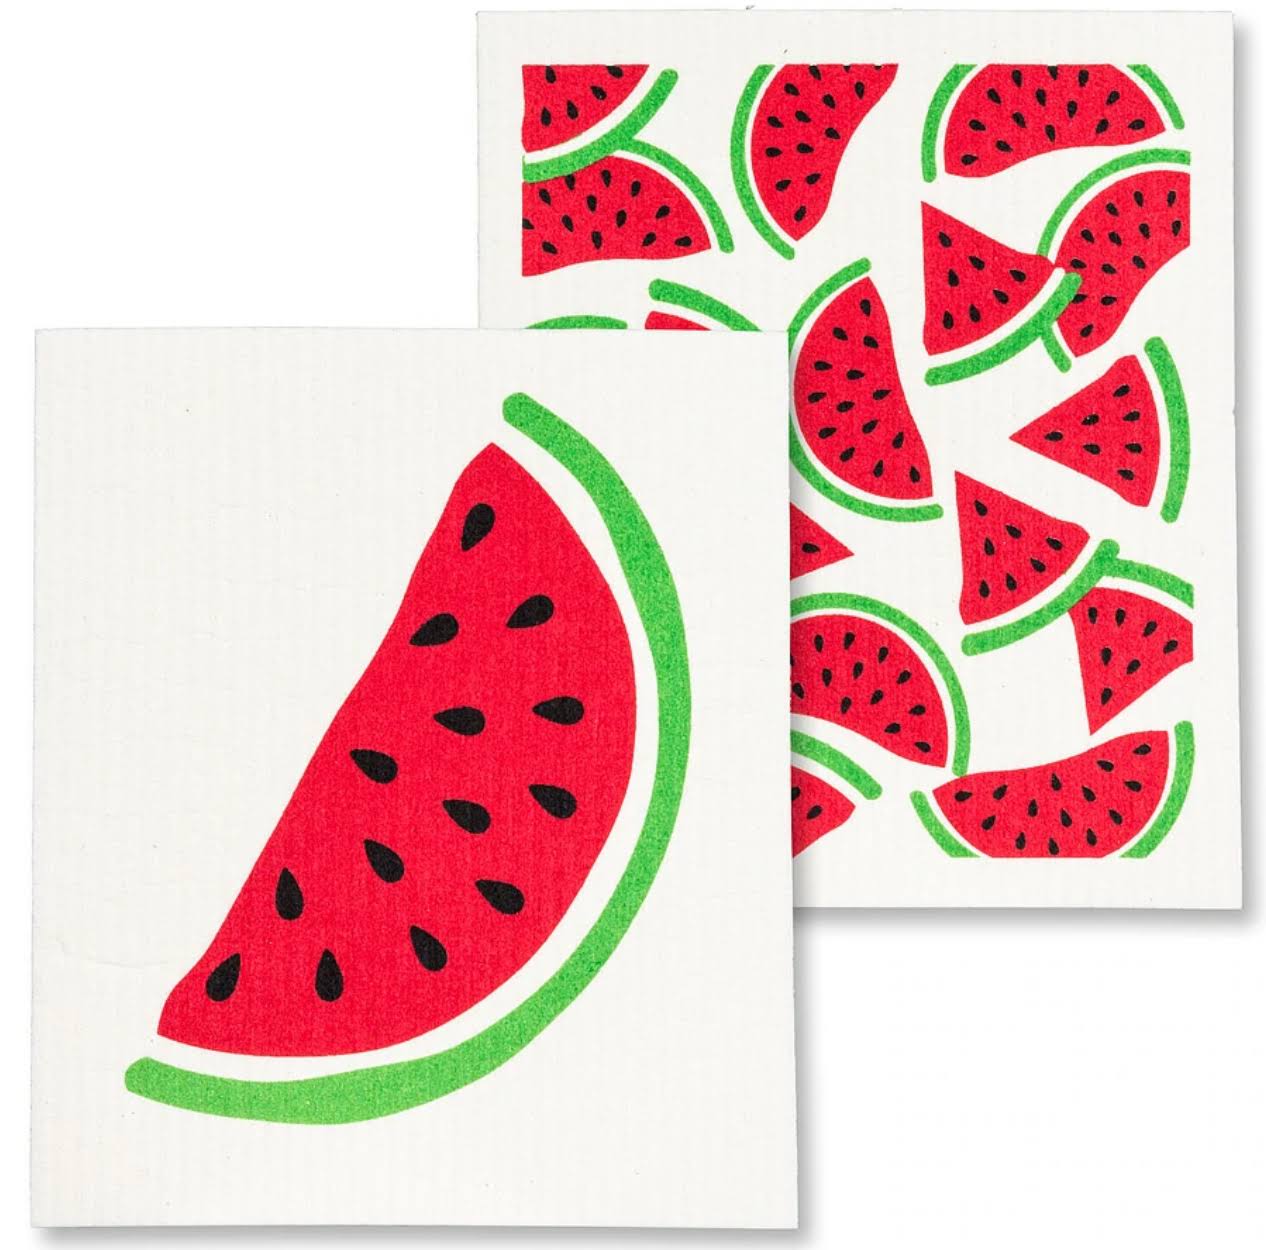 Abbott Collections AB-84-ASD-AB-80 6.5 x 8 in. Watermelon Dishcloths Ivory & Red - Set of 2